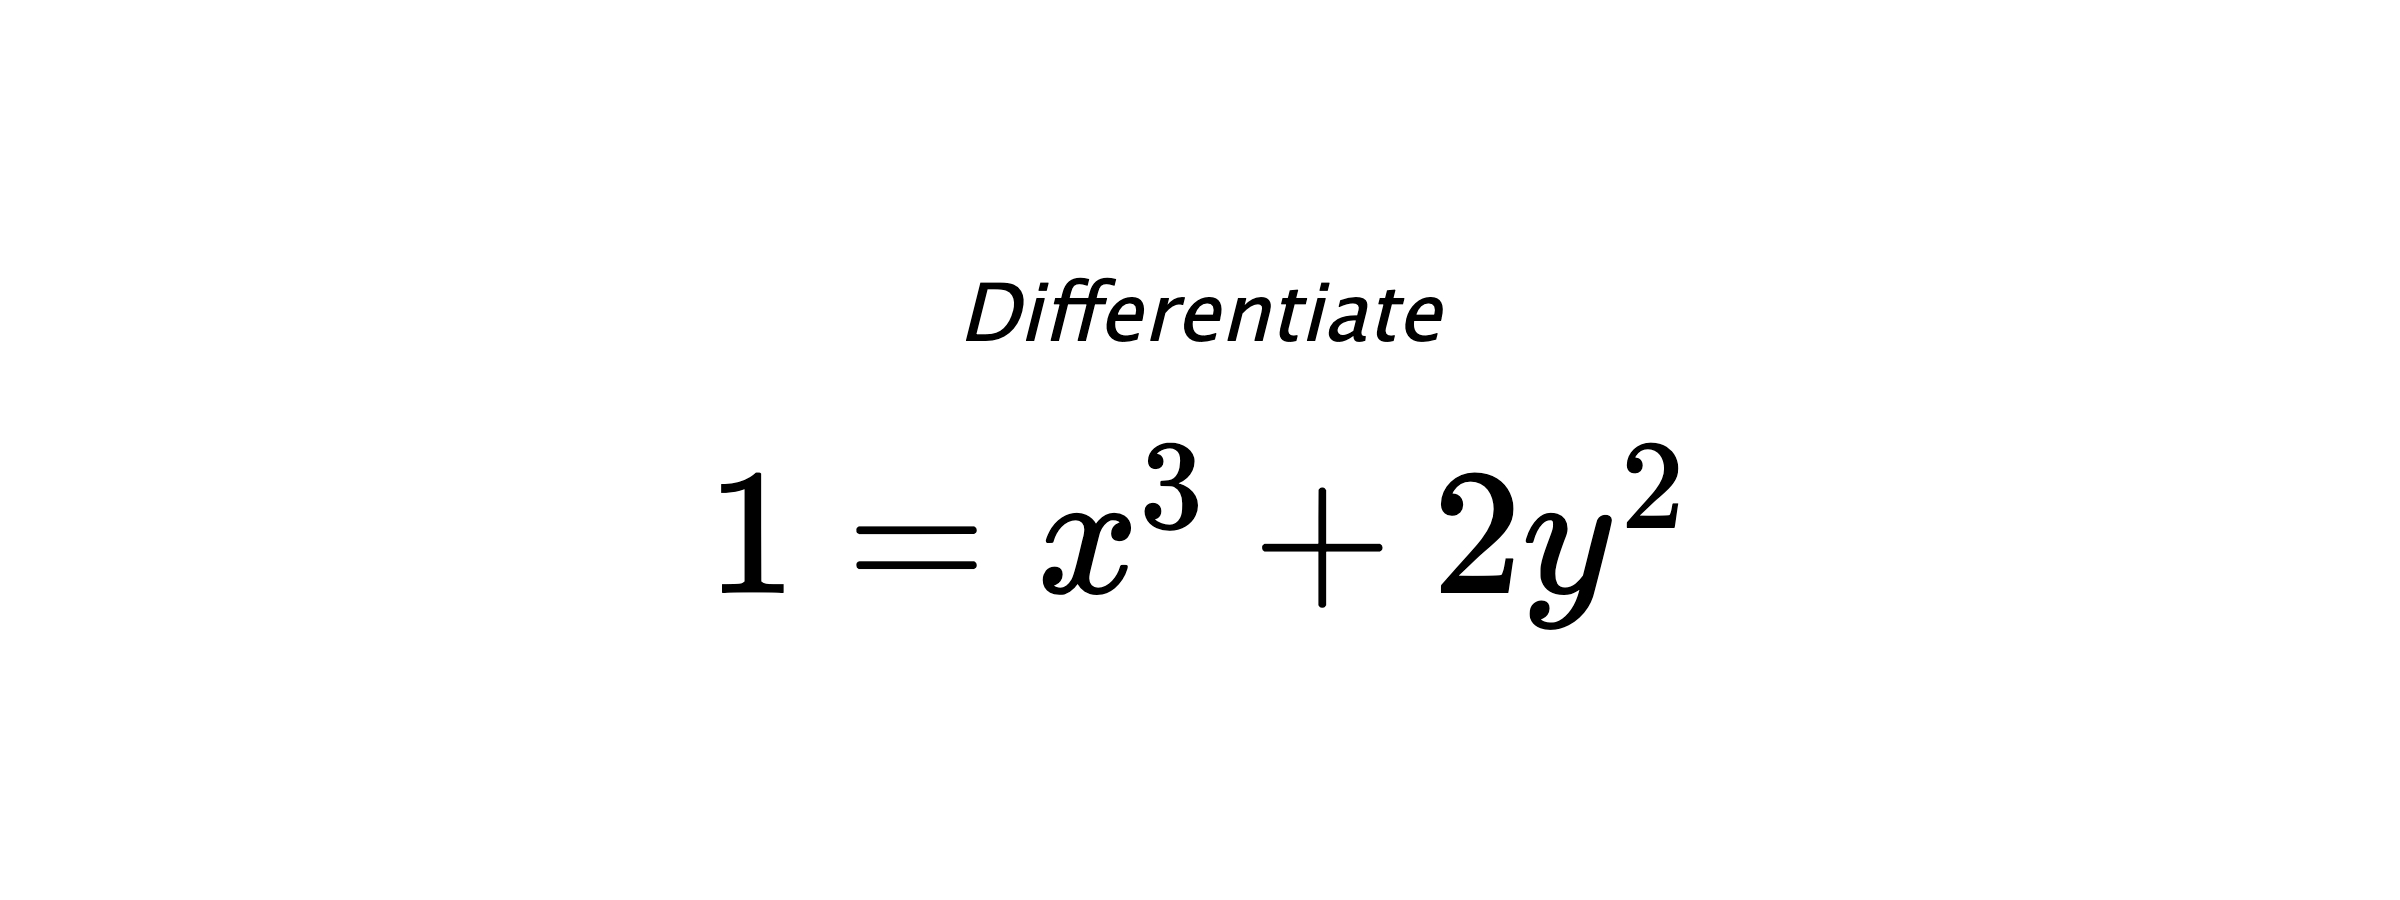 Differentiate $ 1 = x^3+2y^2 $